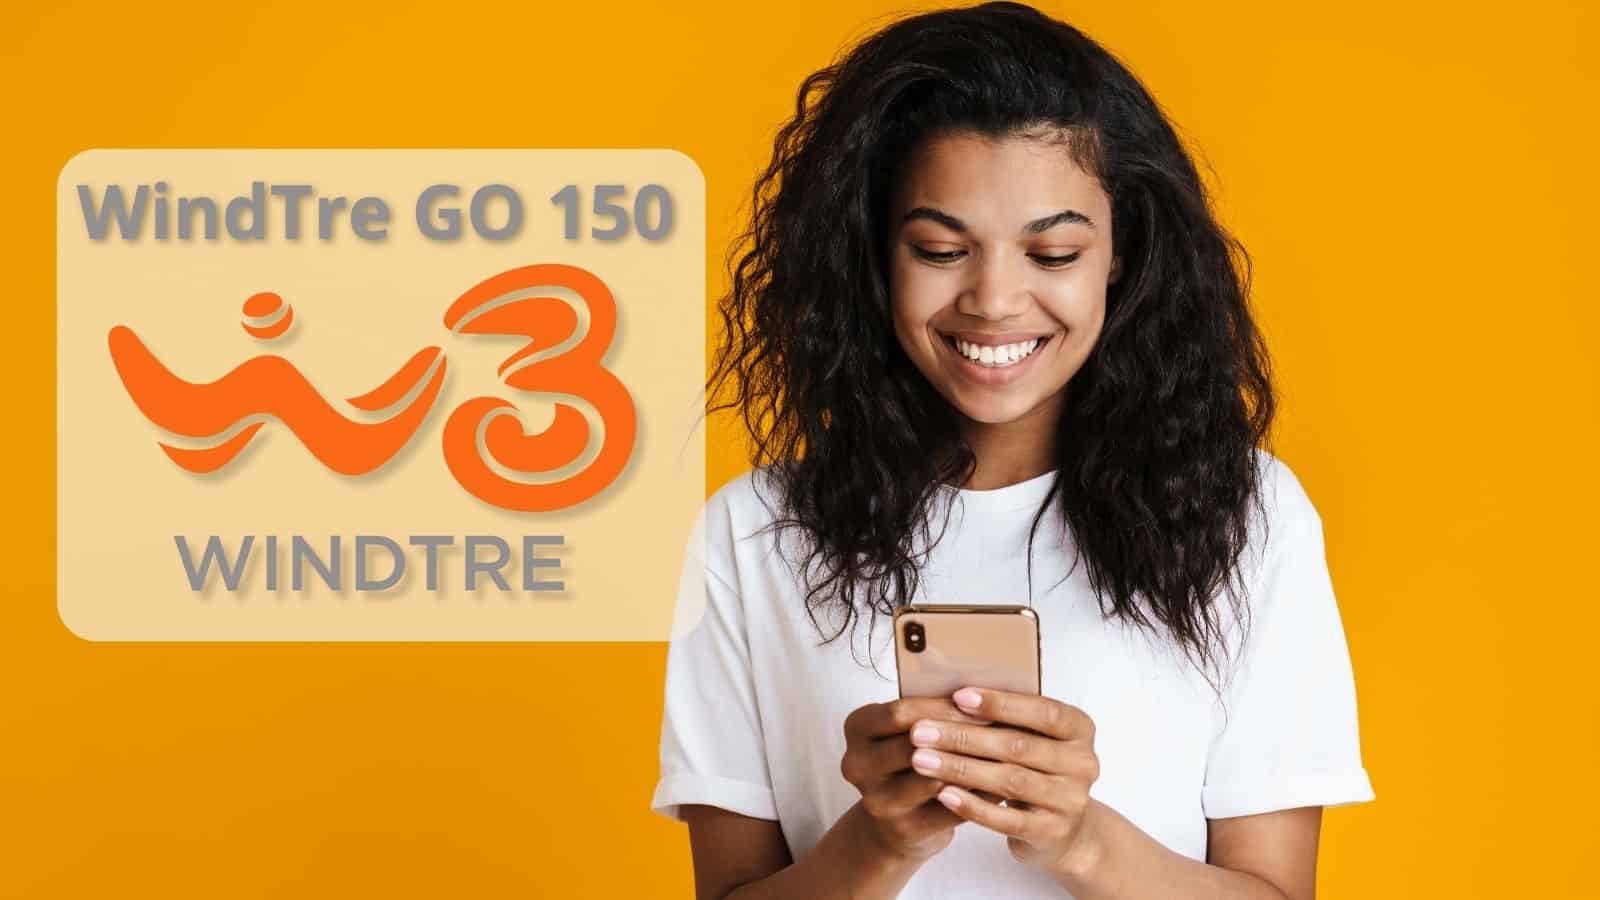 WindTre GO 150 Limited Edition 5G Easy Pay: proroga dell'offerta